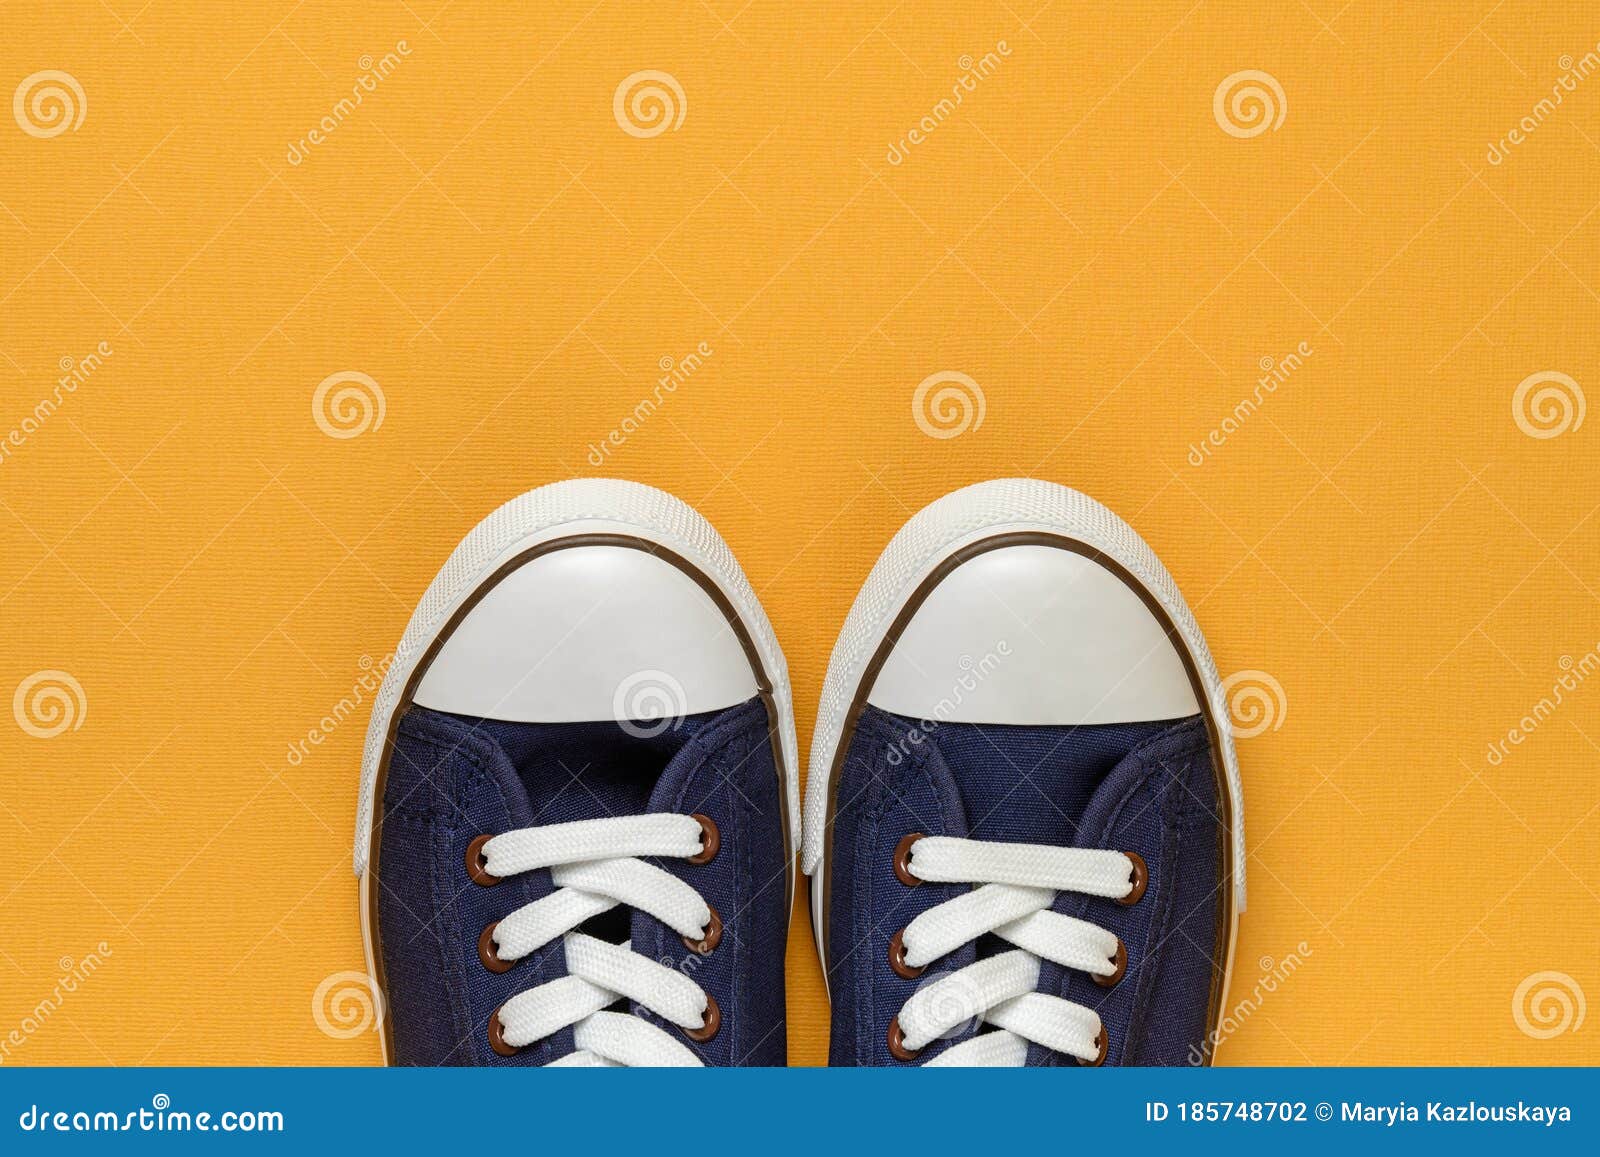 Pair of Classic Blue Sneakers or Gumshoes with White Shoe Laces on a ...